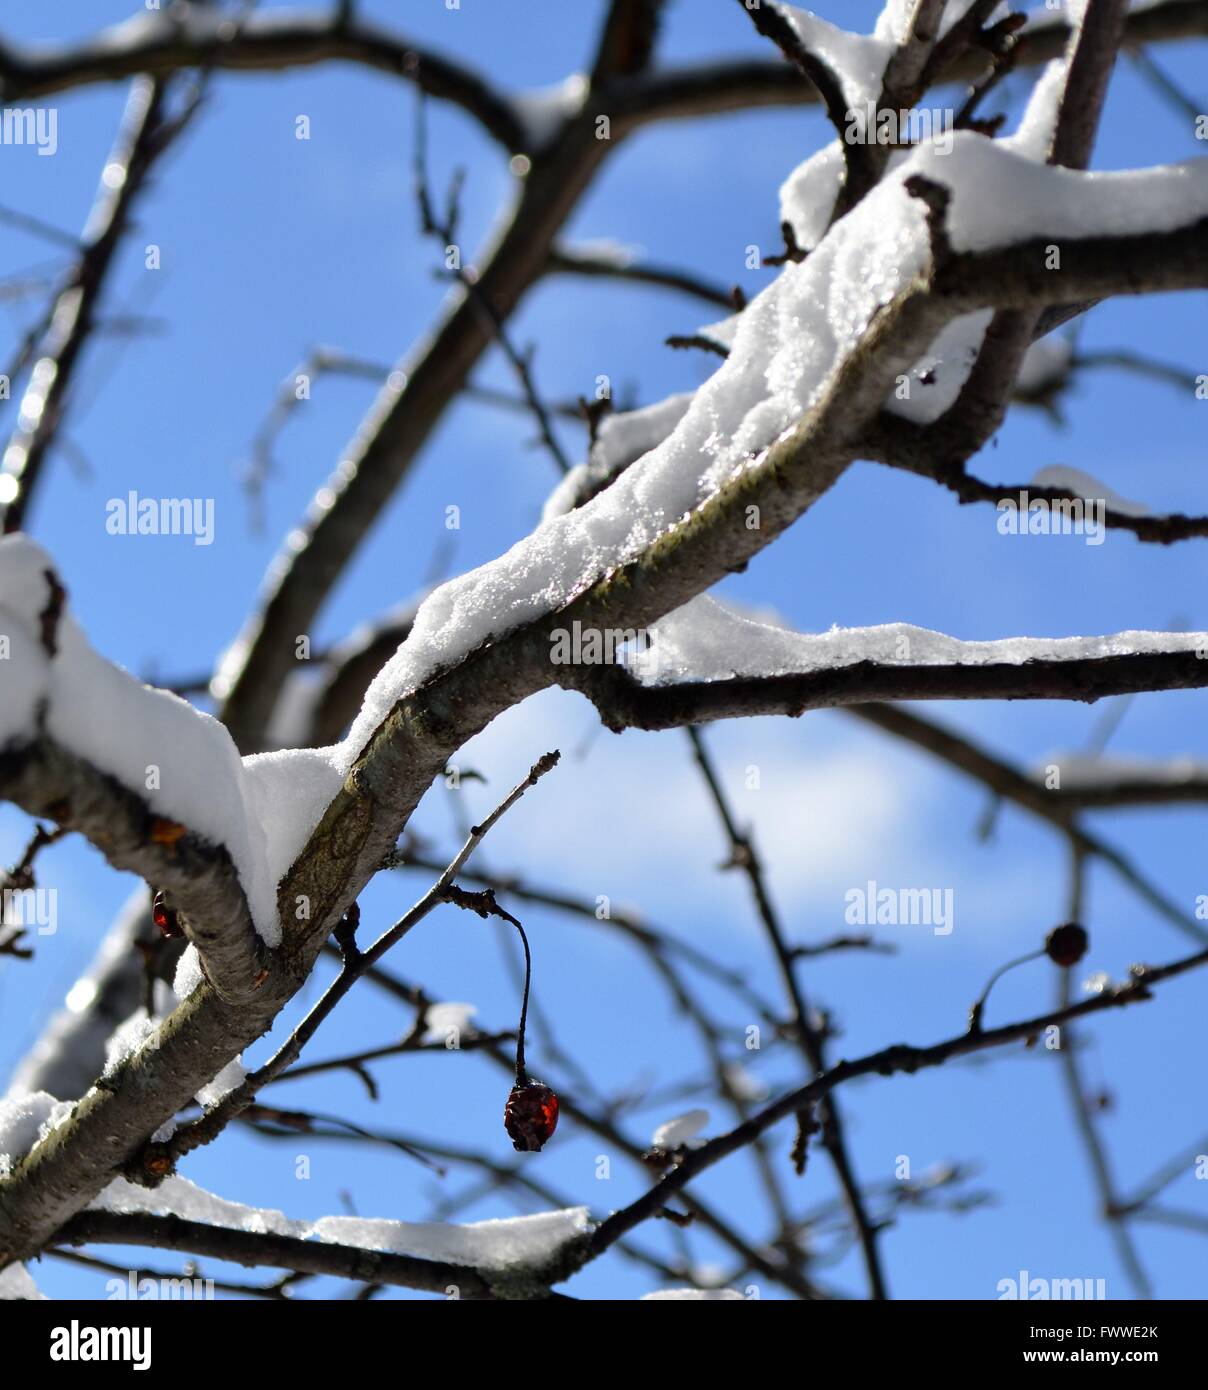 A close up of a snow covered tree branch against a bright blue sky Stock Photo